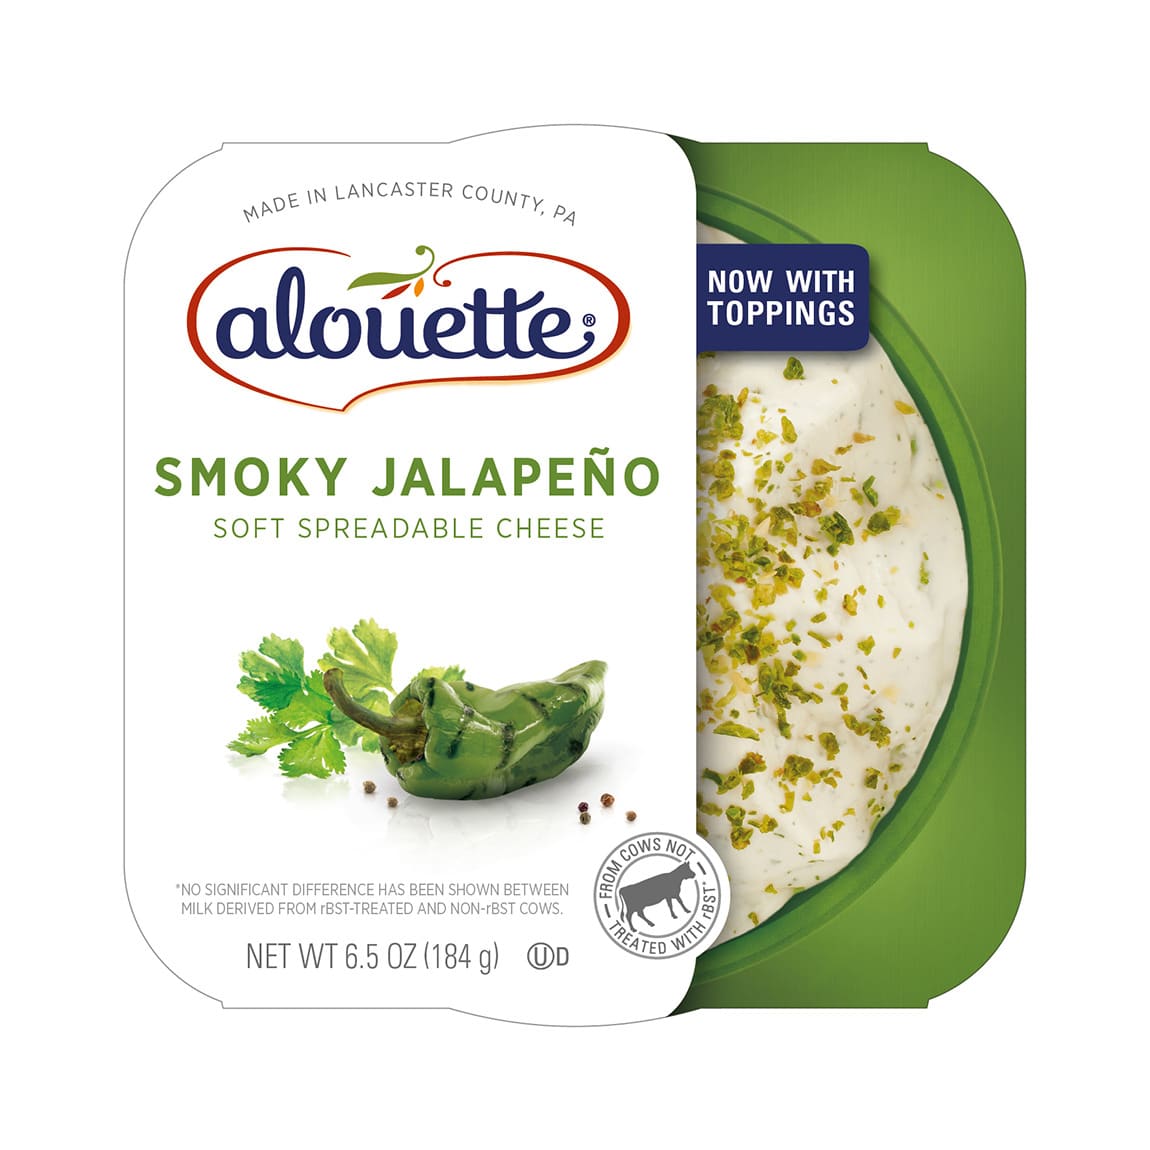 Alouette Smoky Jalapeno soft spreadable cheese packaging